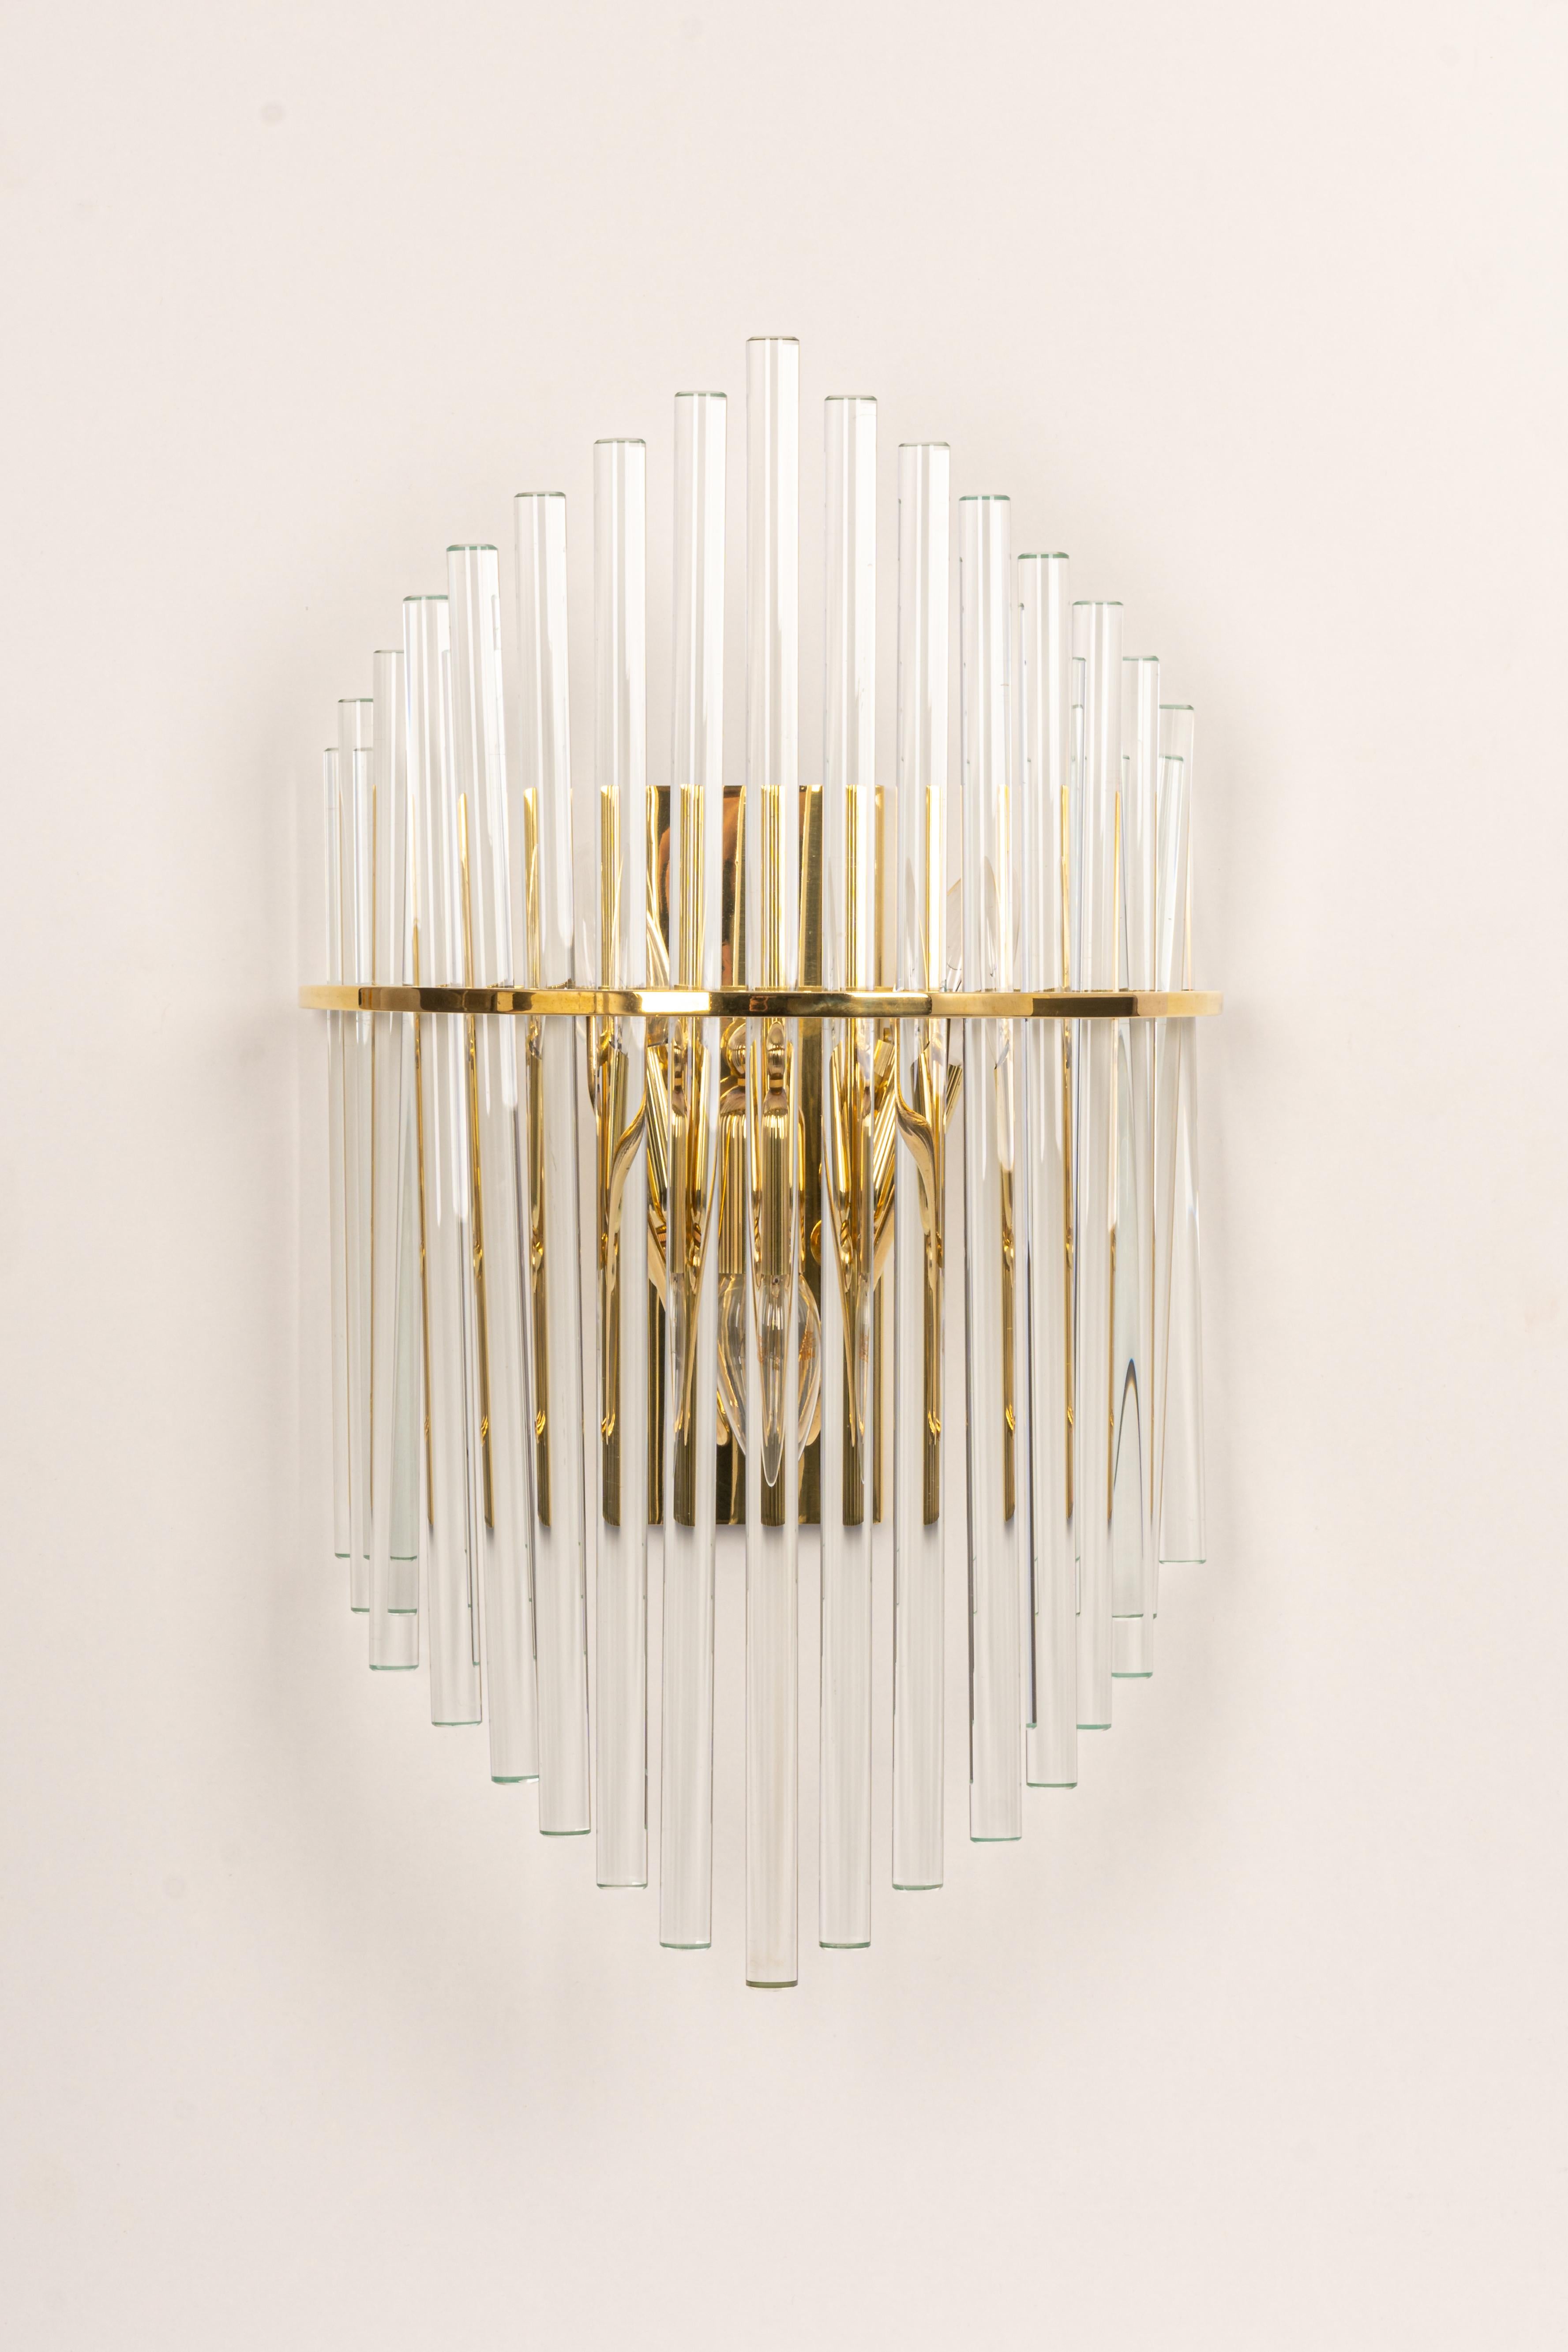 1 of 3 Pairs of Wonderful Crystal Rod Sconces by Christoph Palme, Germany, 1970s For Sale 1